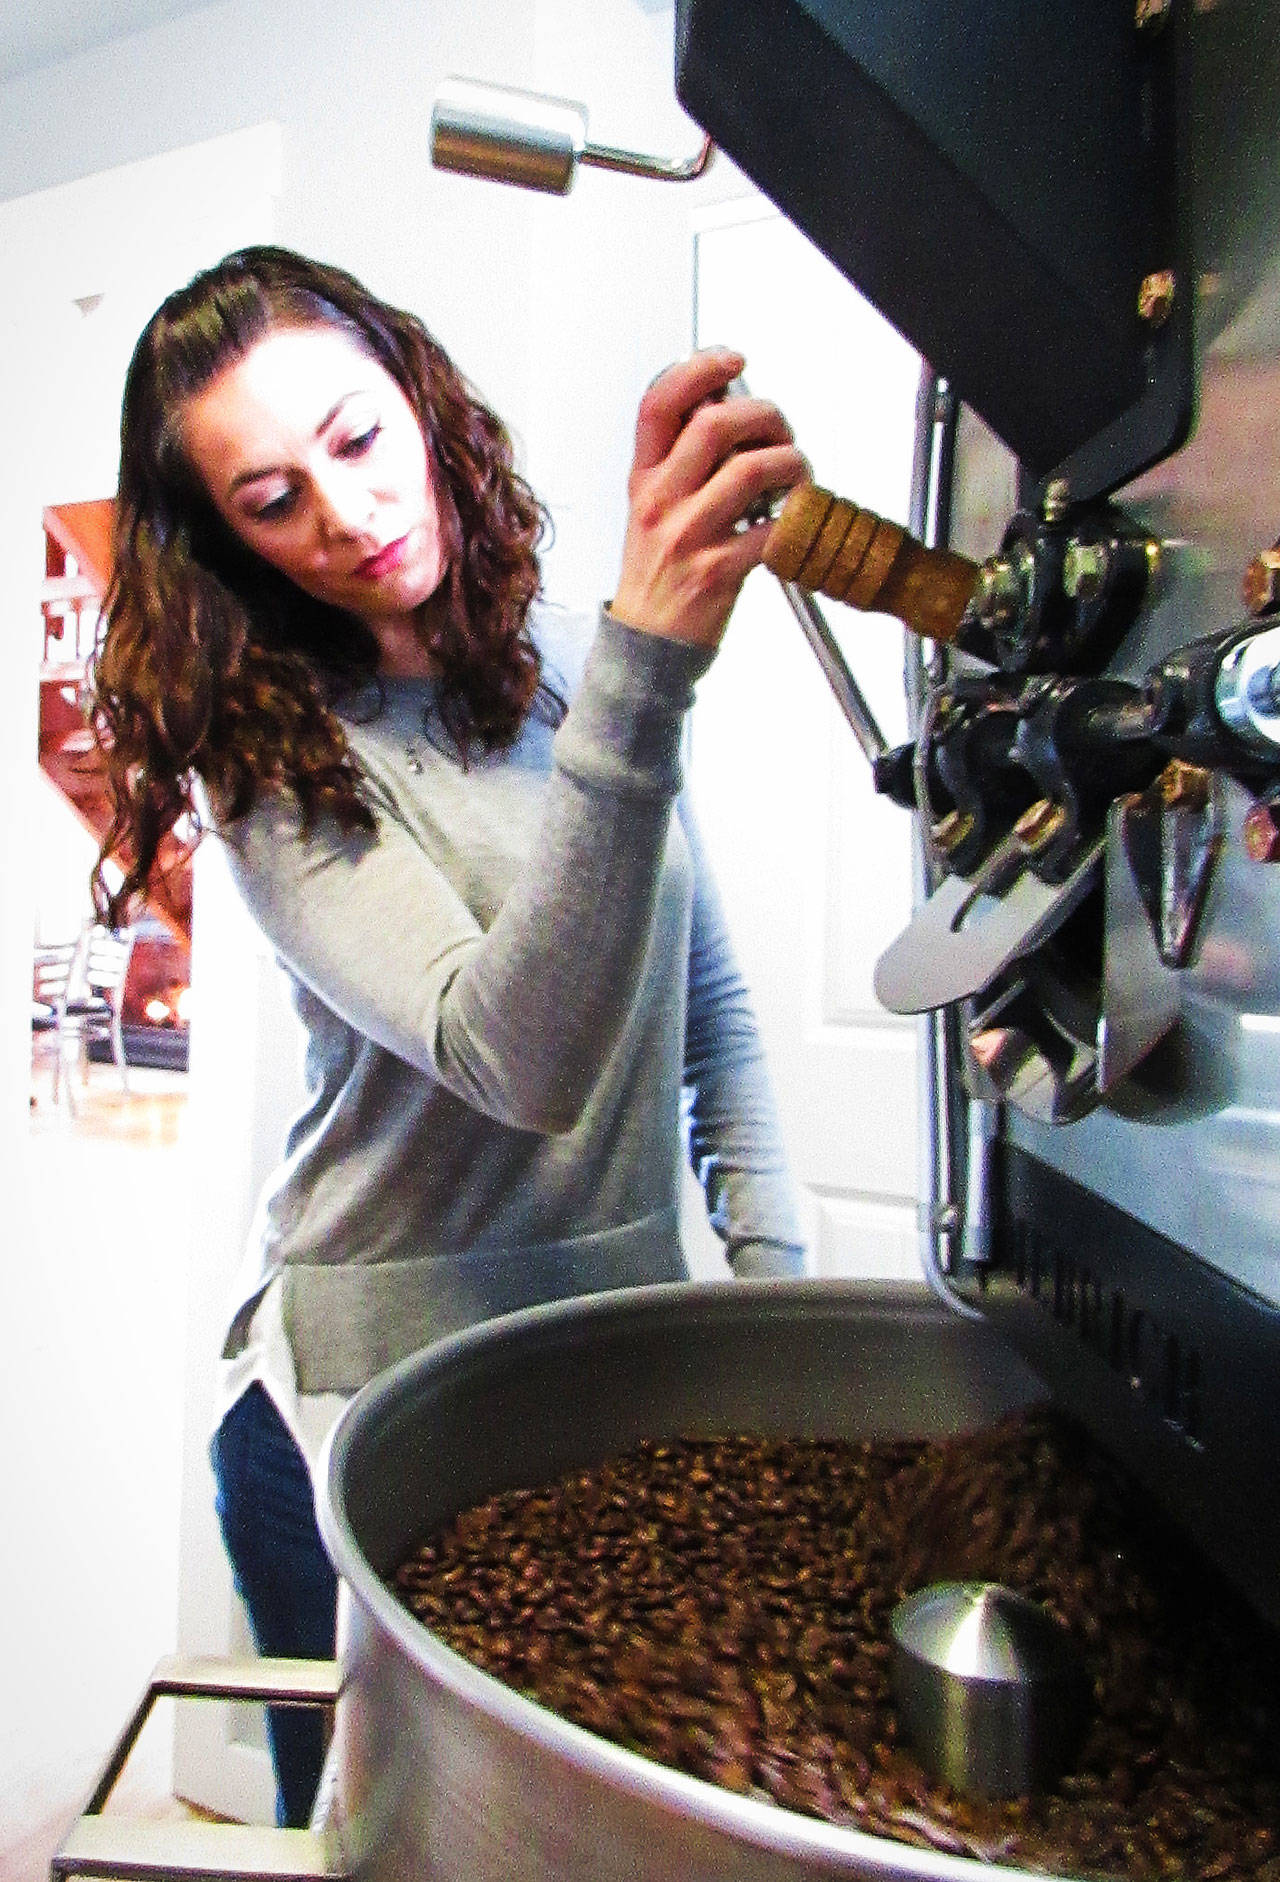 Mirihia roasts fresh coffee with the new “craft/artisan” machine recently added at Ocean Beach Roasters & Bistro. Photo by Scott D. Johnston.